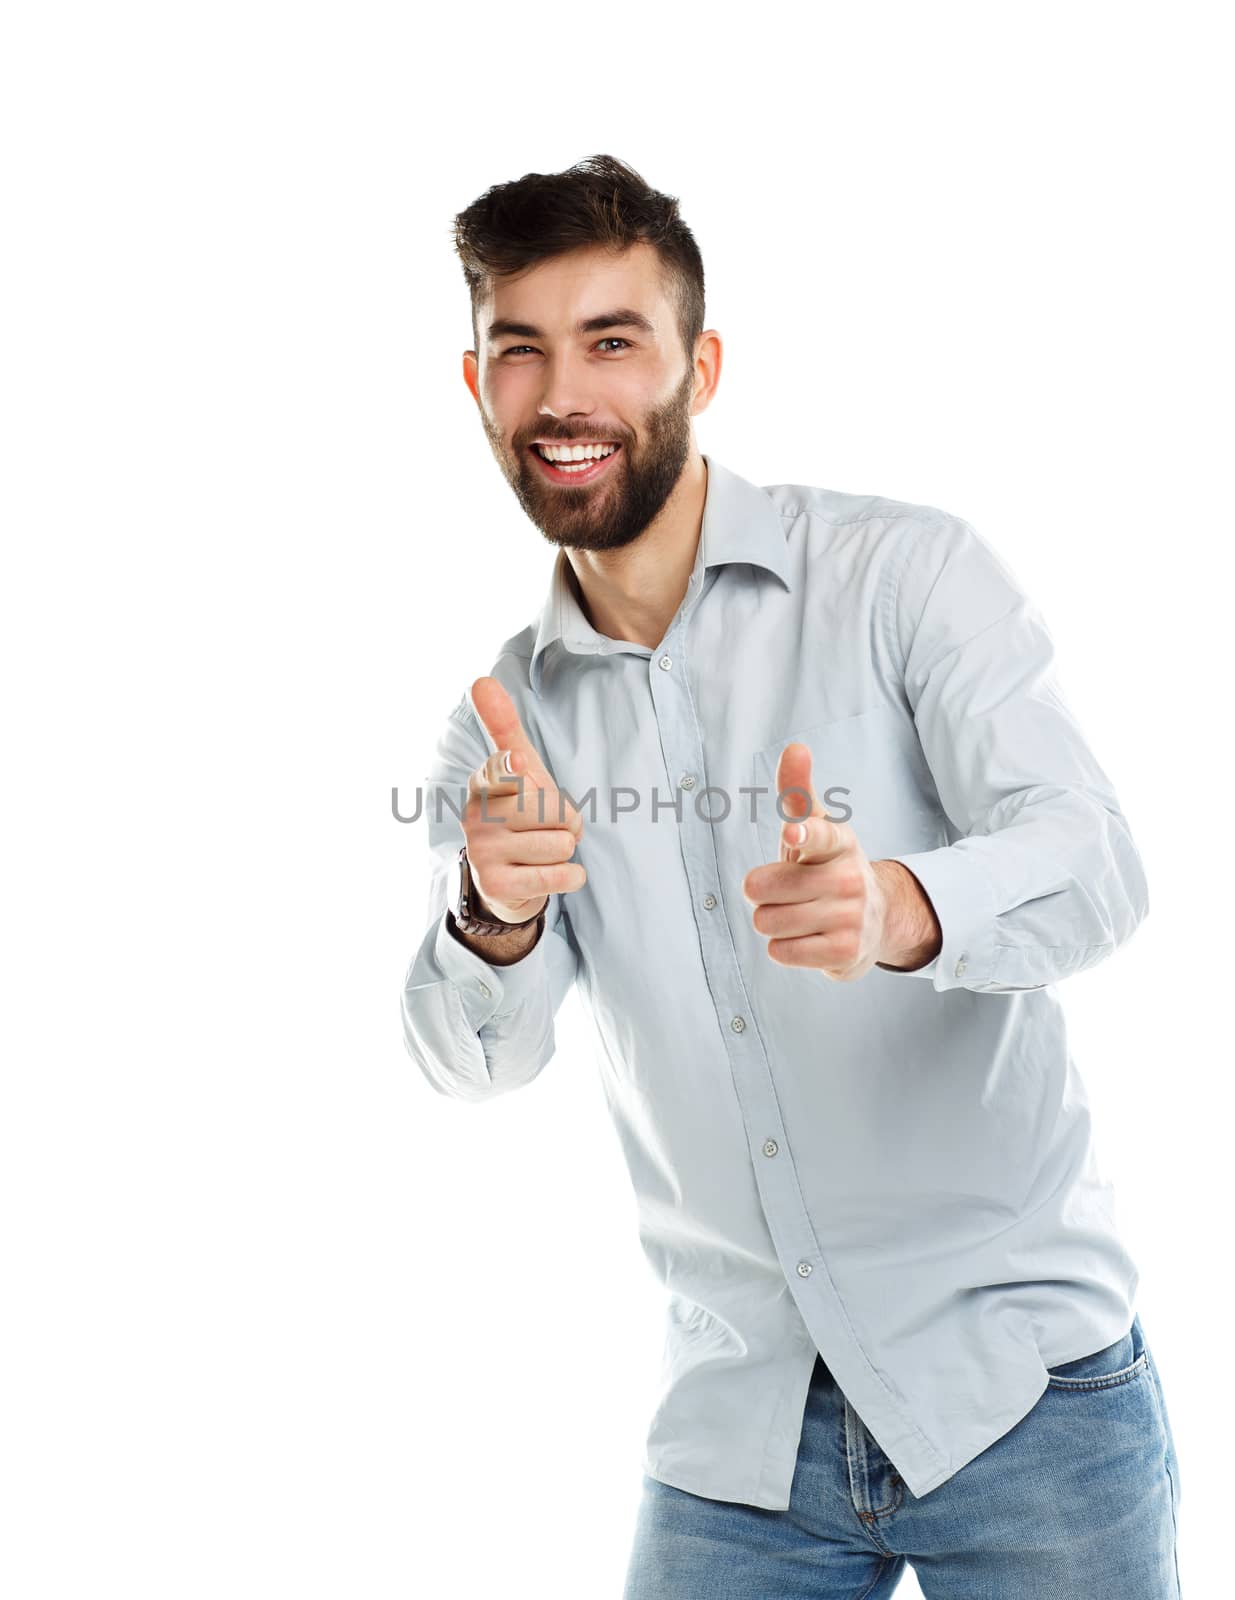 A young bearded man smiling with a fingers up isolated on white background